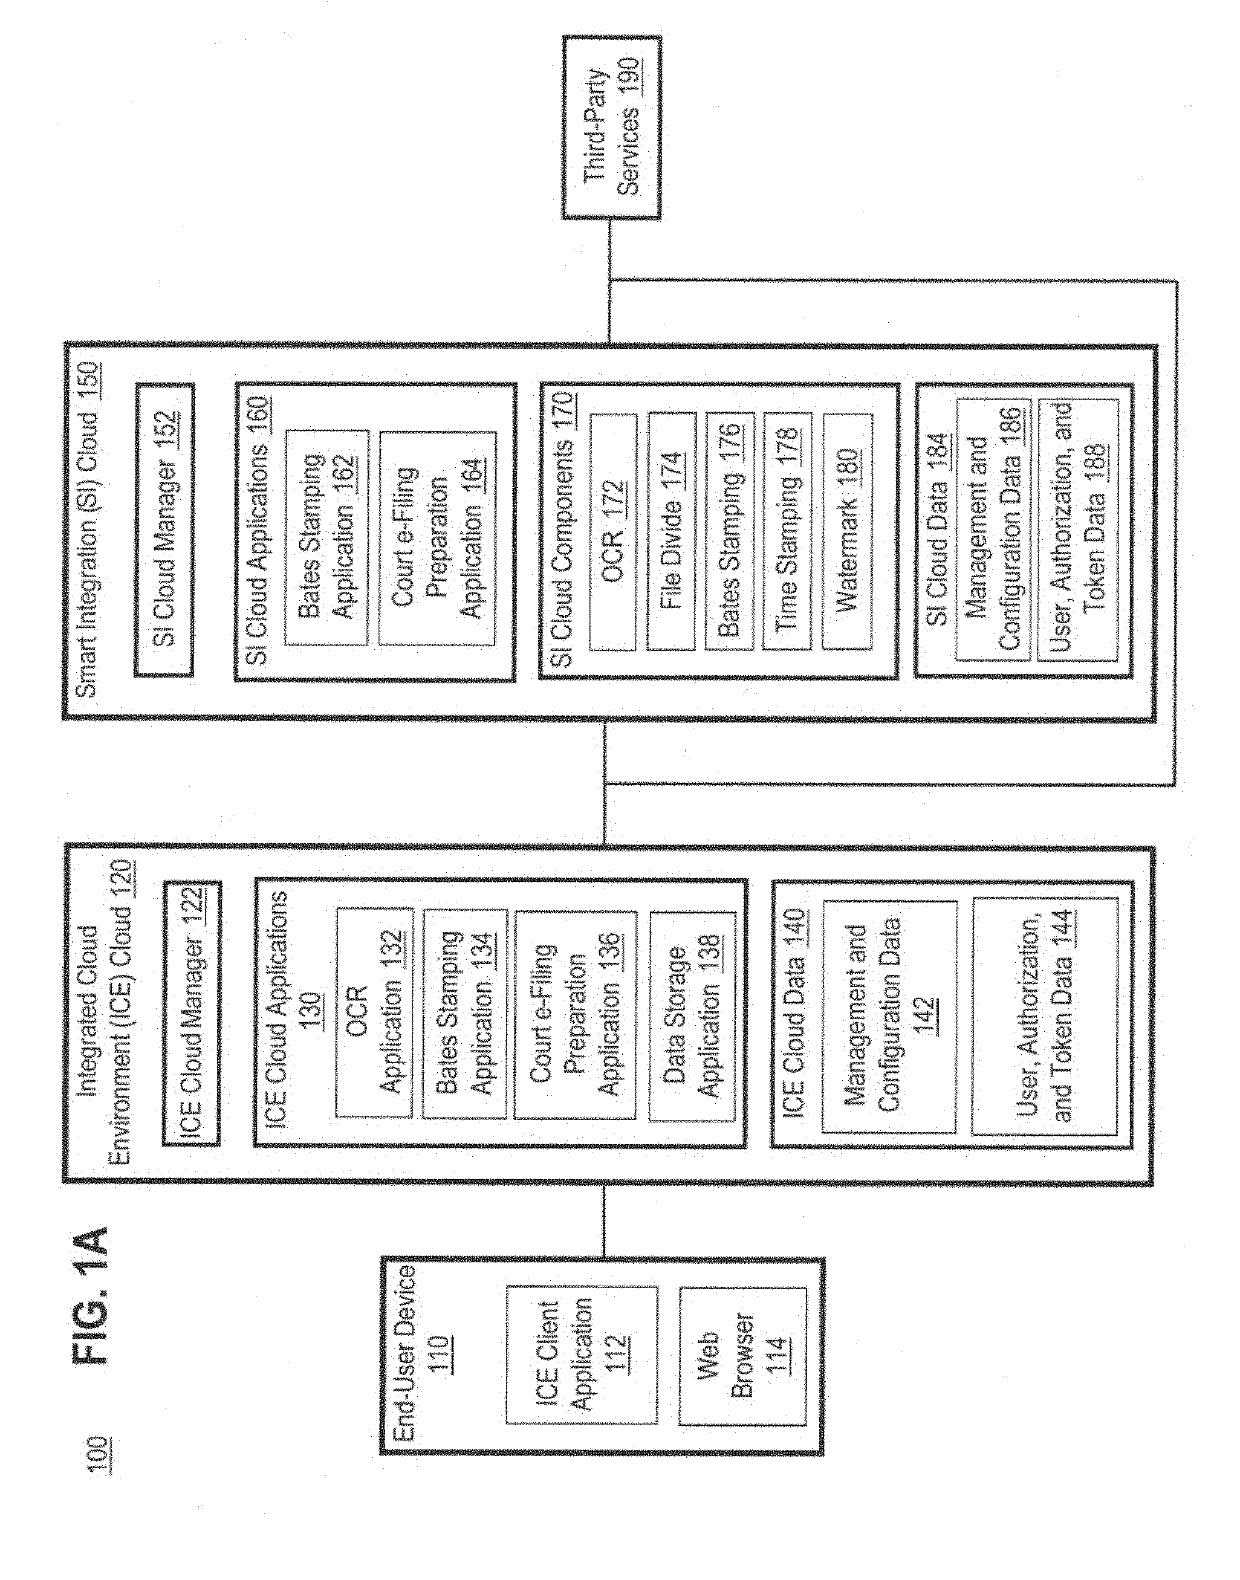 Approach for Providing Access to Cloud Services on End-User Devices Using End-to-End Integration